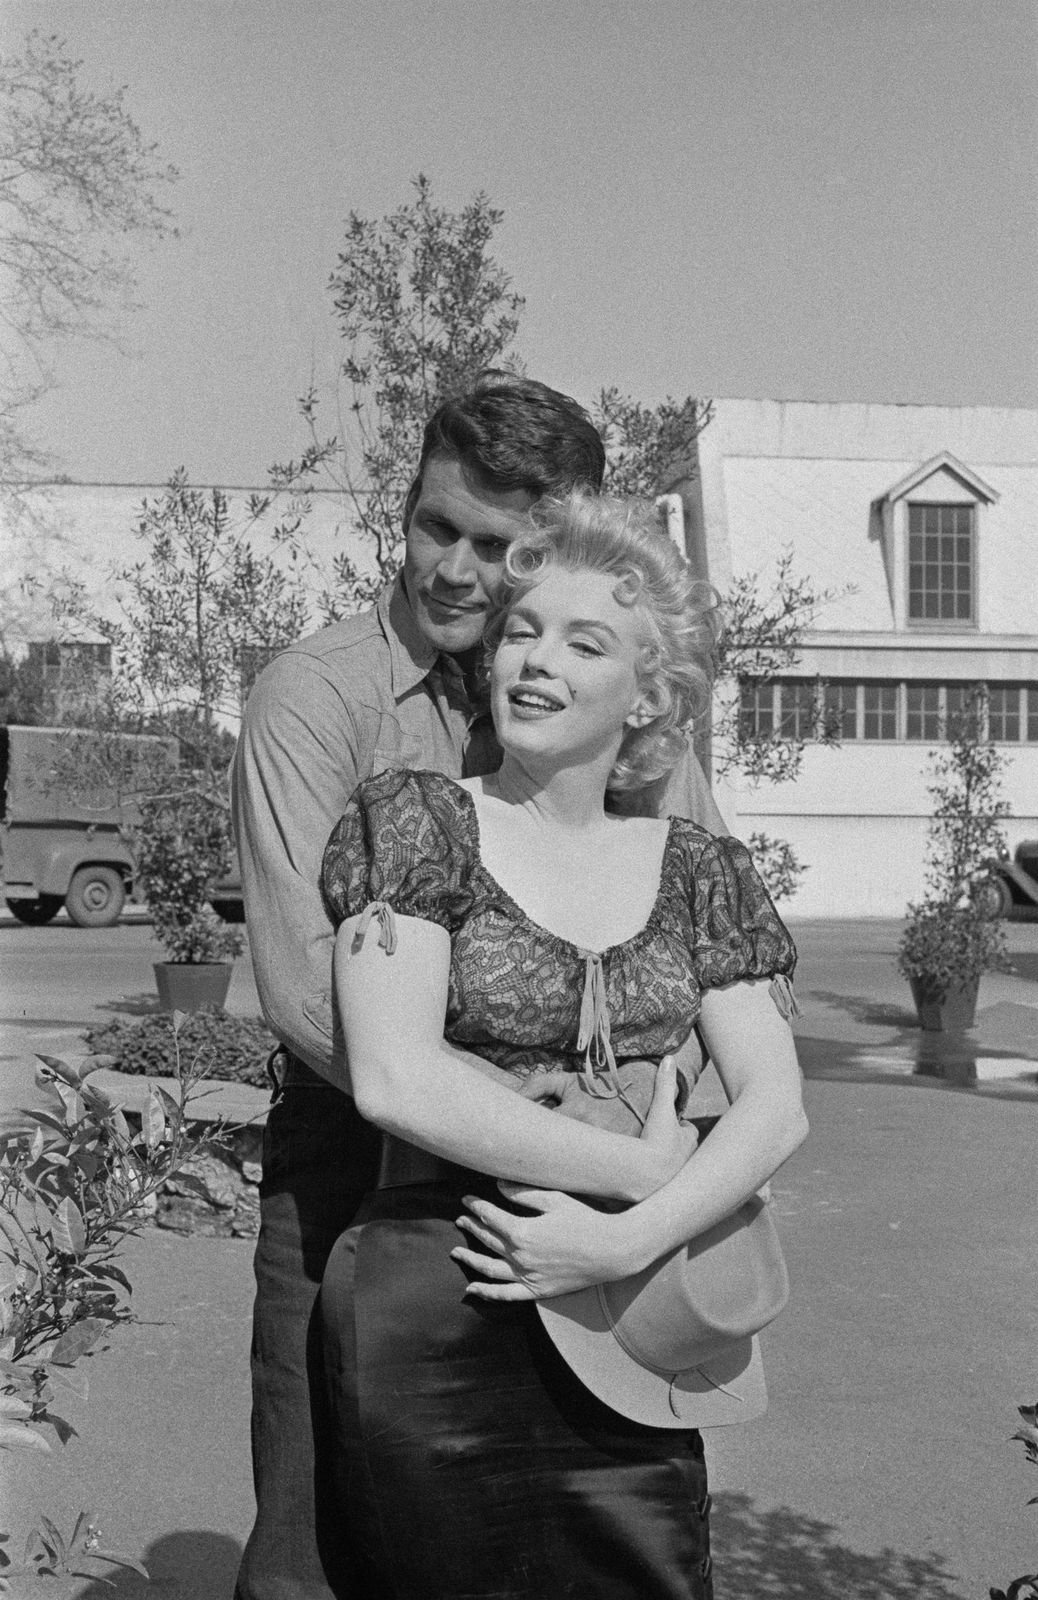  The late Marilyn Monroe with Don Murray, during a press call to publicise, "Bus Stop" in 1956. Photo: Getty Images